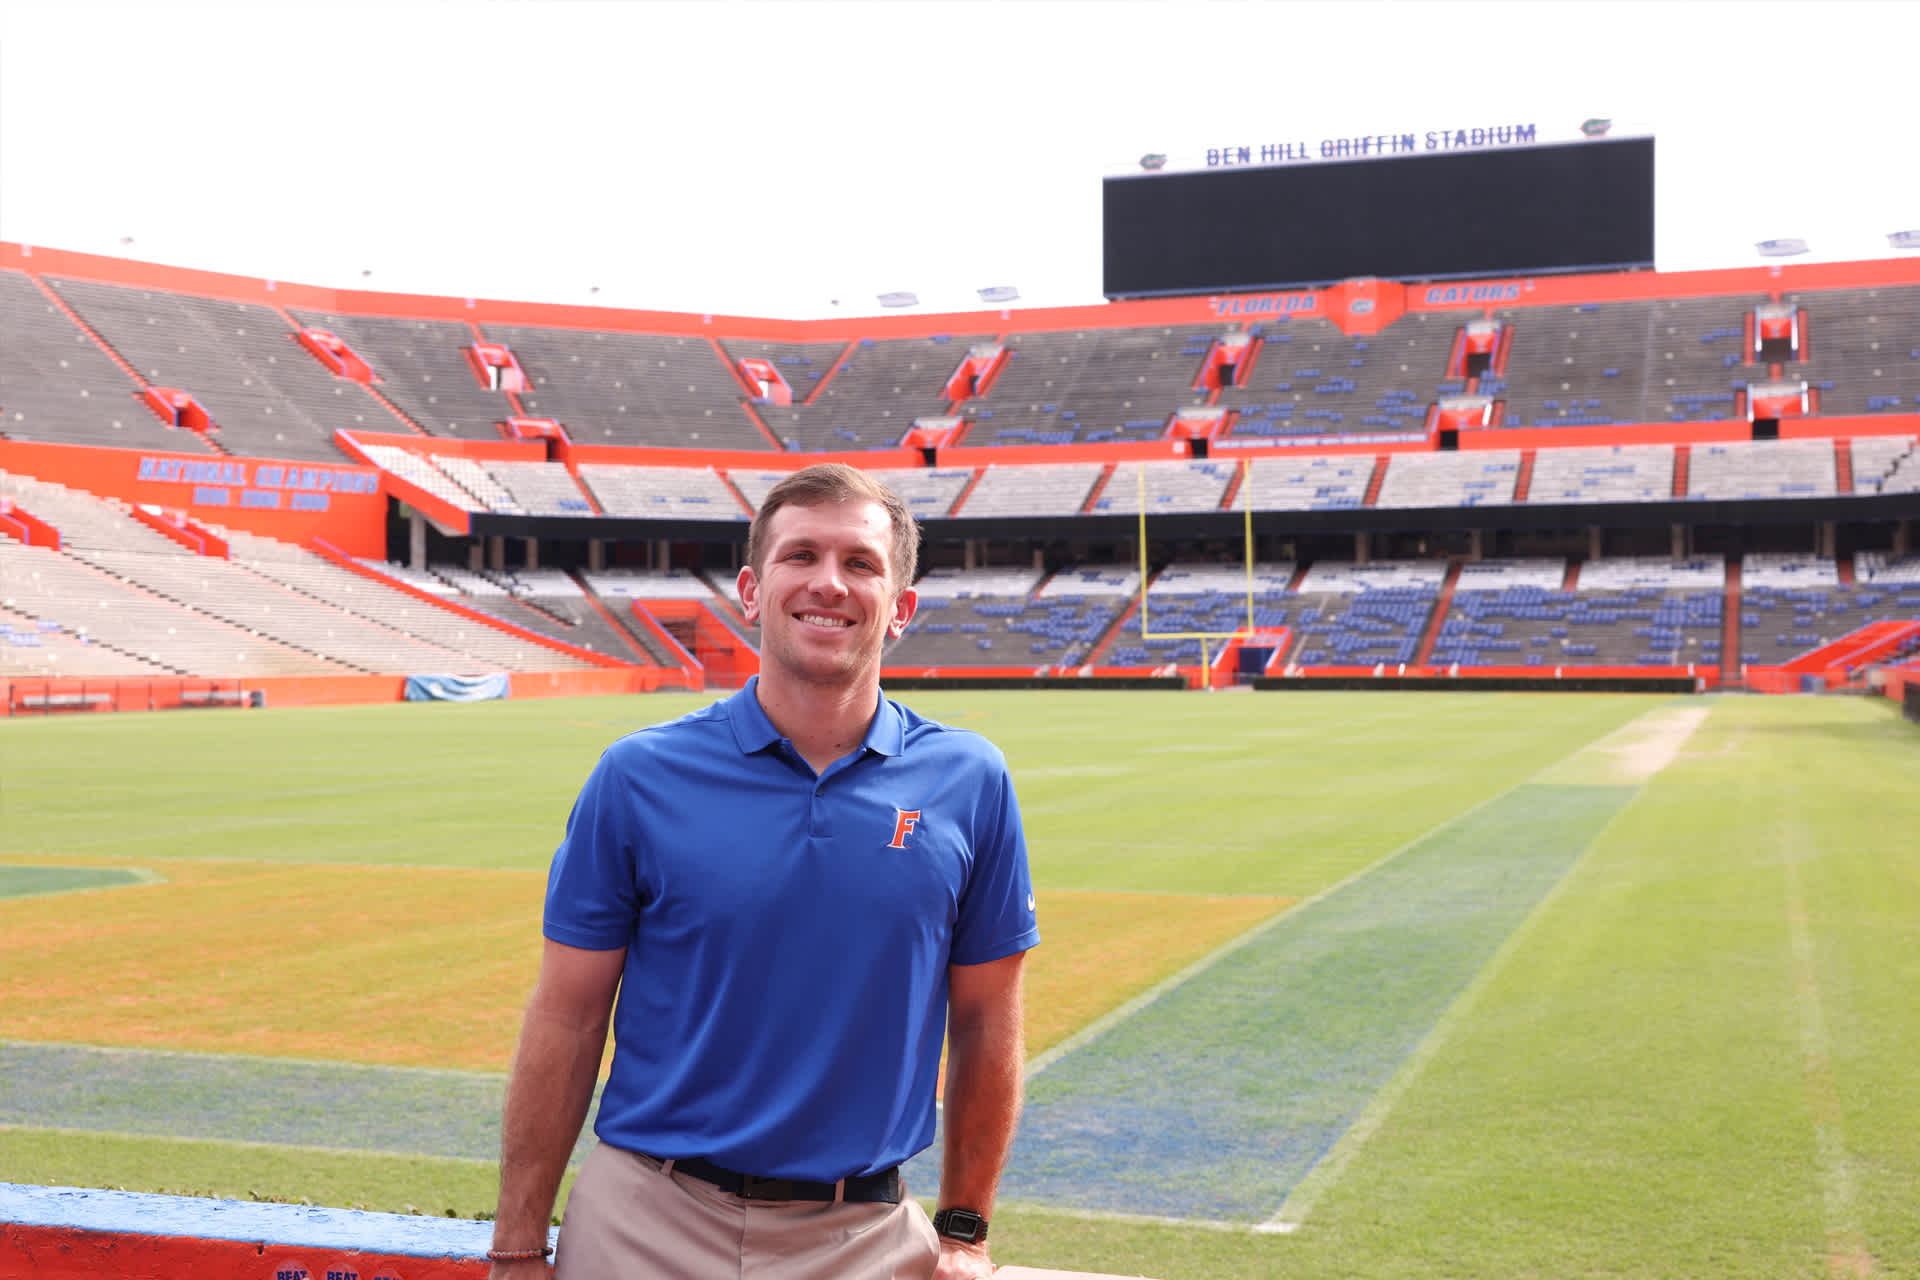 A man in a blue polo shirt with the Florida Gators football team logo poses in an empty stadium.